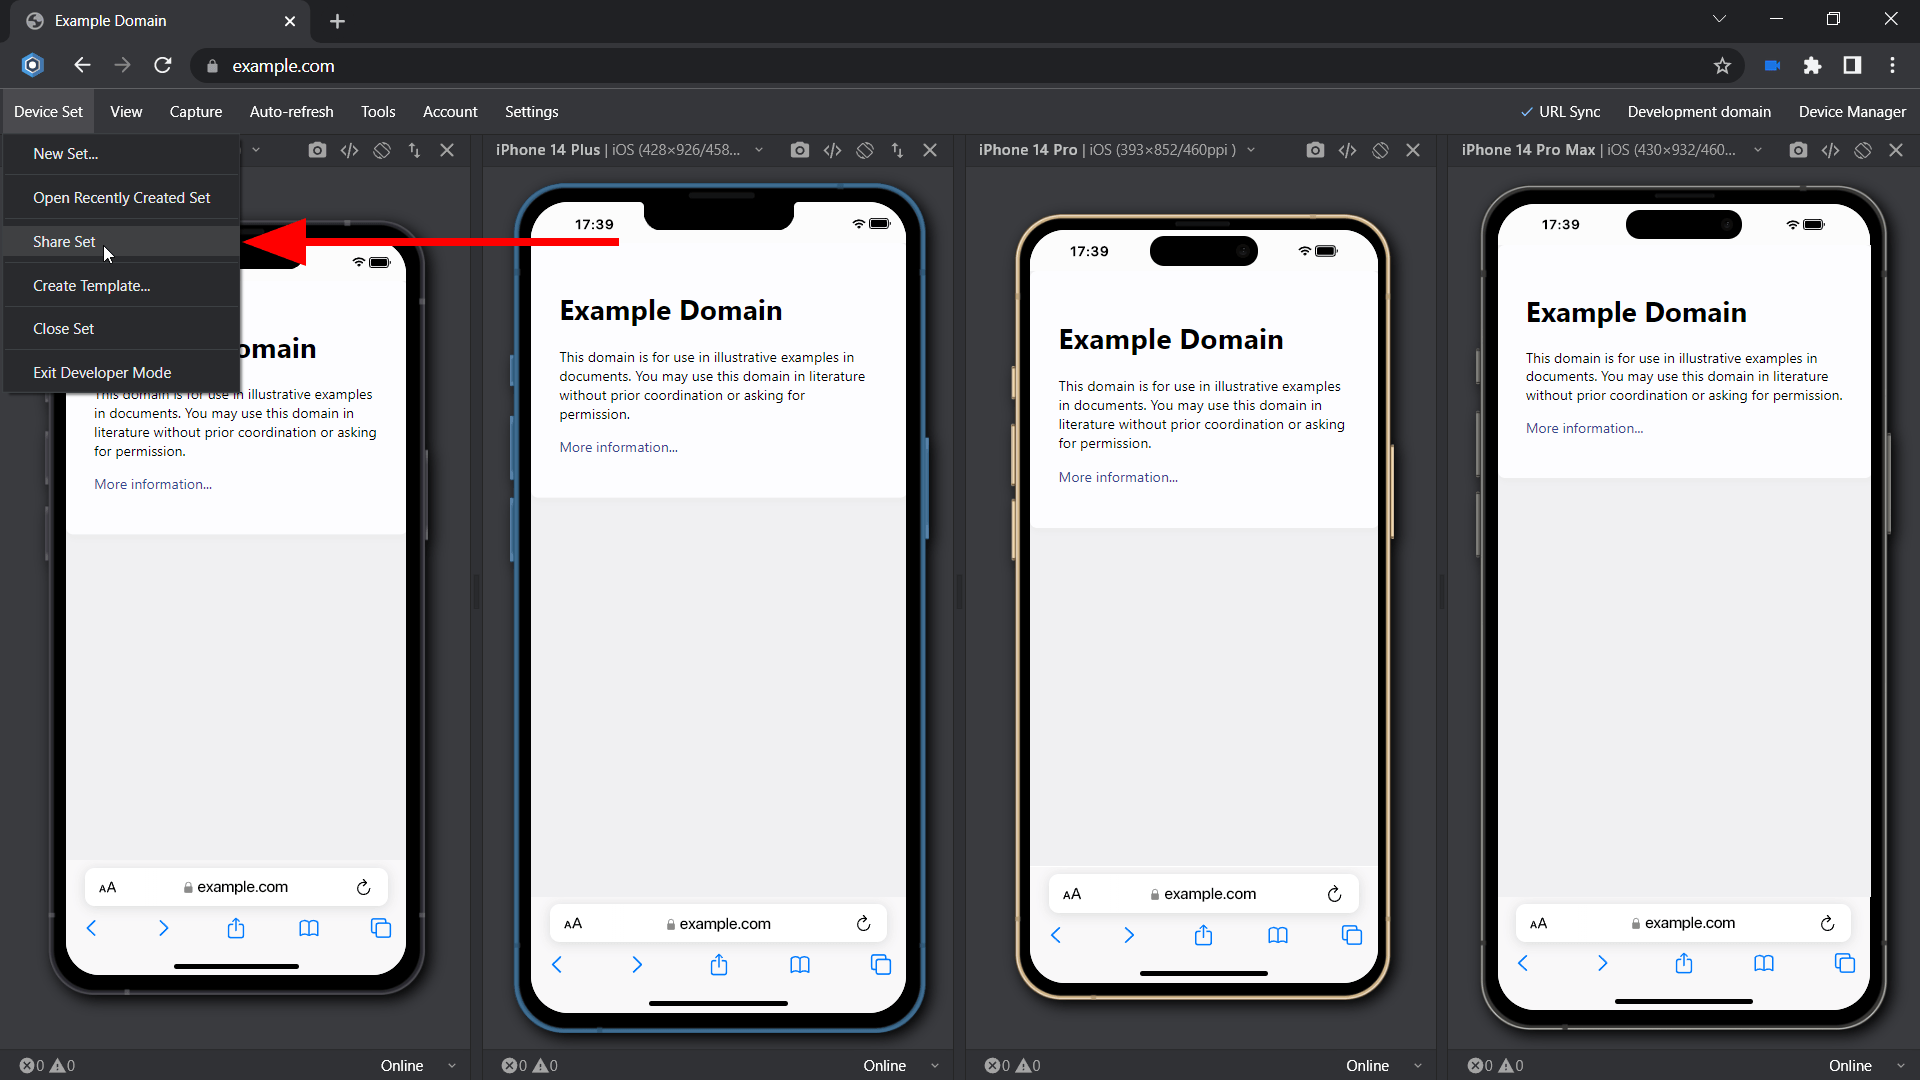 Test with your teammates on iPhone 14-series